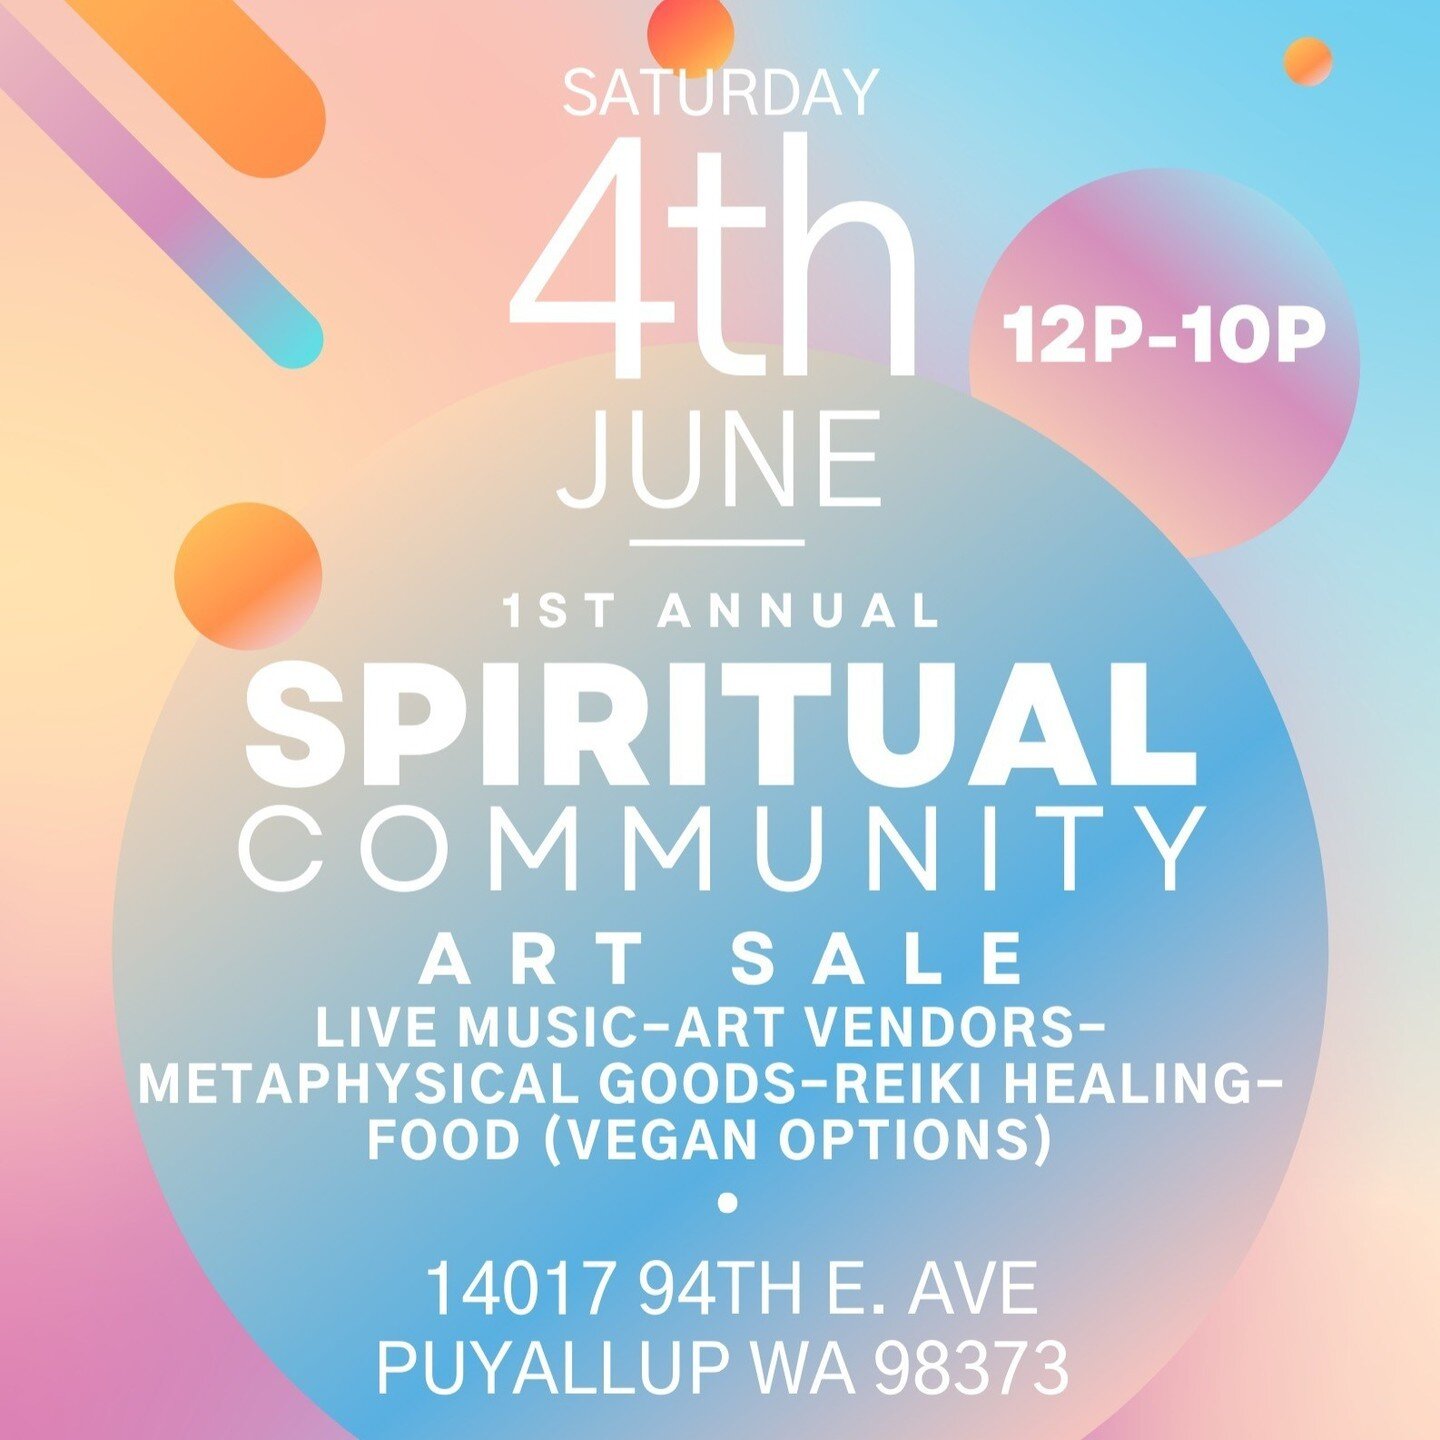 Super-excited to perform 🧑🏾&zwj;🎤on Saturday June 4th, 7:30pm at the 1st Annual Spiritual Community Art Sale event!

14017 94th E. Ave Puyallup, WA

#saturday #bthelyte #lyftoff321 #power2thepoetry #tacomaevents #Puyallupevents #goodvibes #support